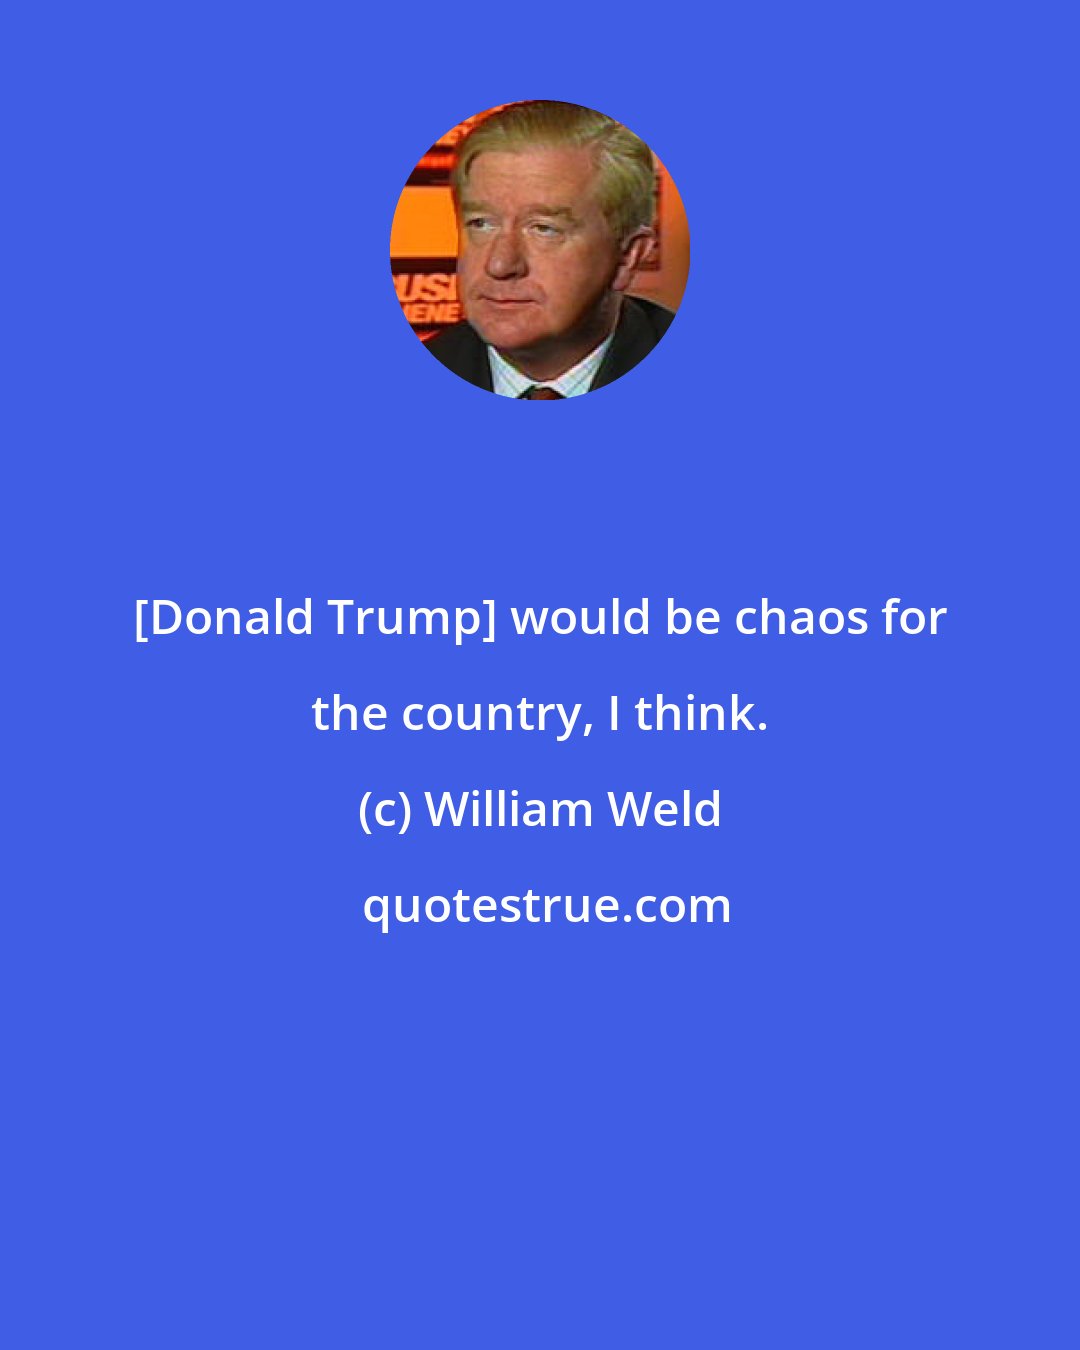 William Weld: [Donald Trump] would be chaos for the country, I think.